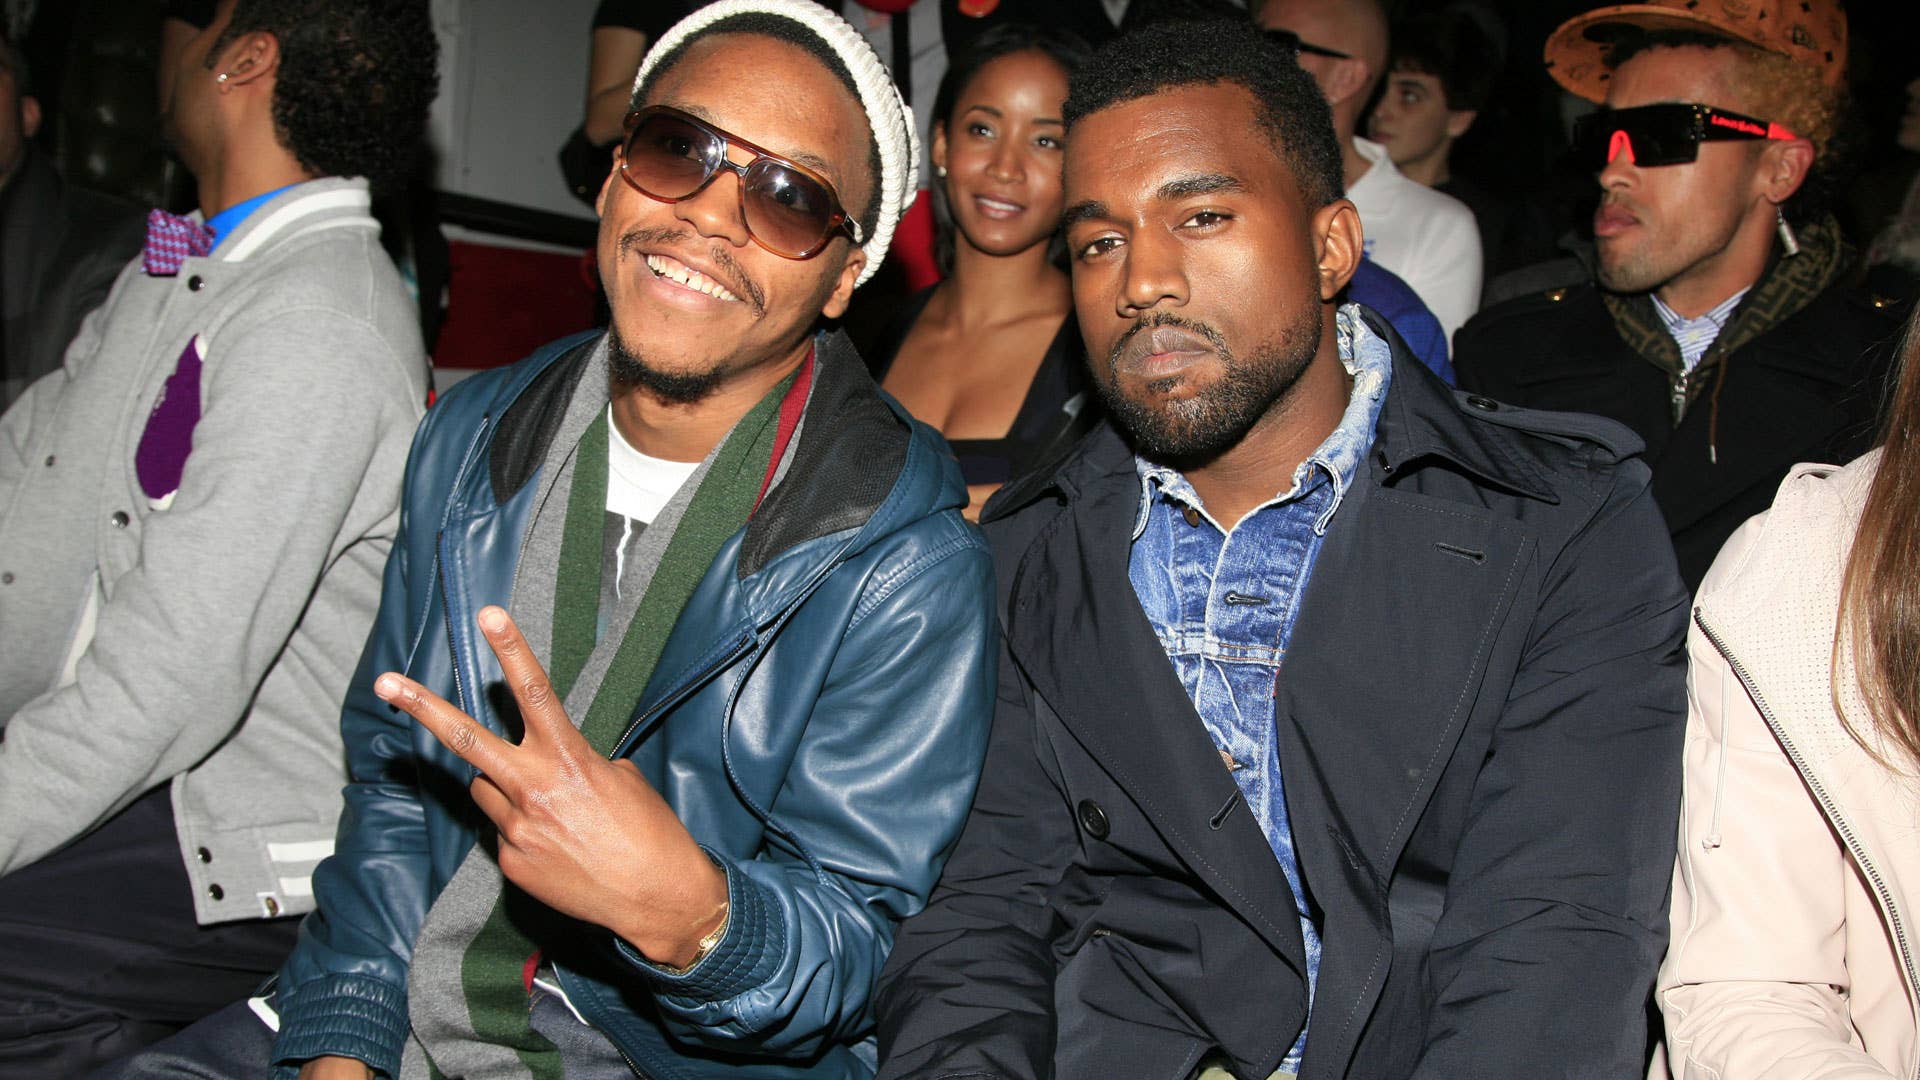 Lupe Fiasco and Kanye West attend Y 3 Fall 2009 Collection at Pier 40.